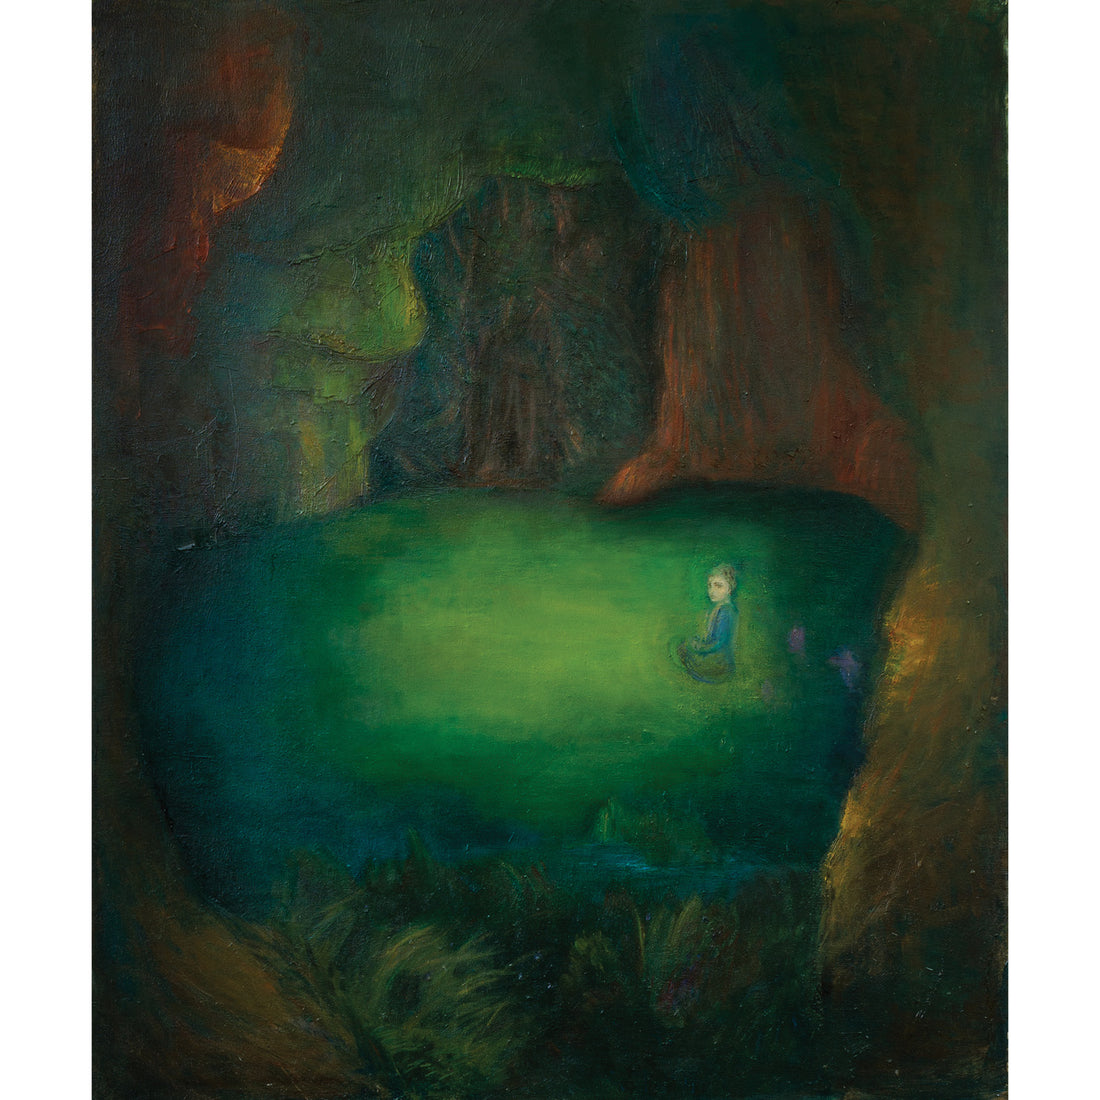 Moojan Nazmi "The Cave and The Figurine" abstract surrealistic painting Canadian Iranian artist